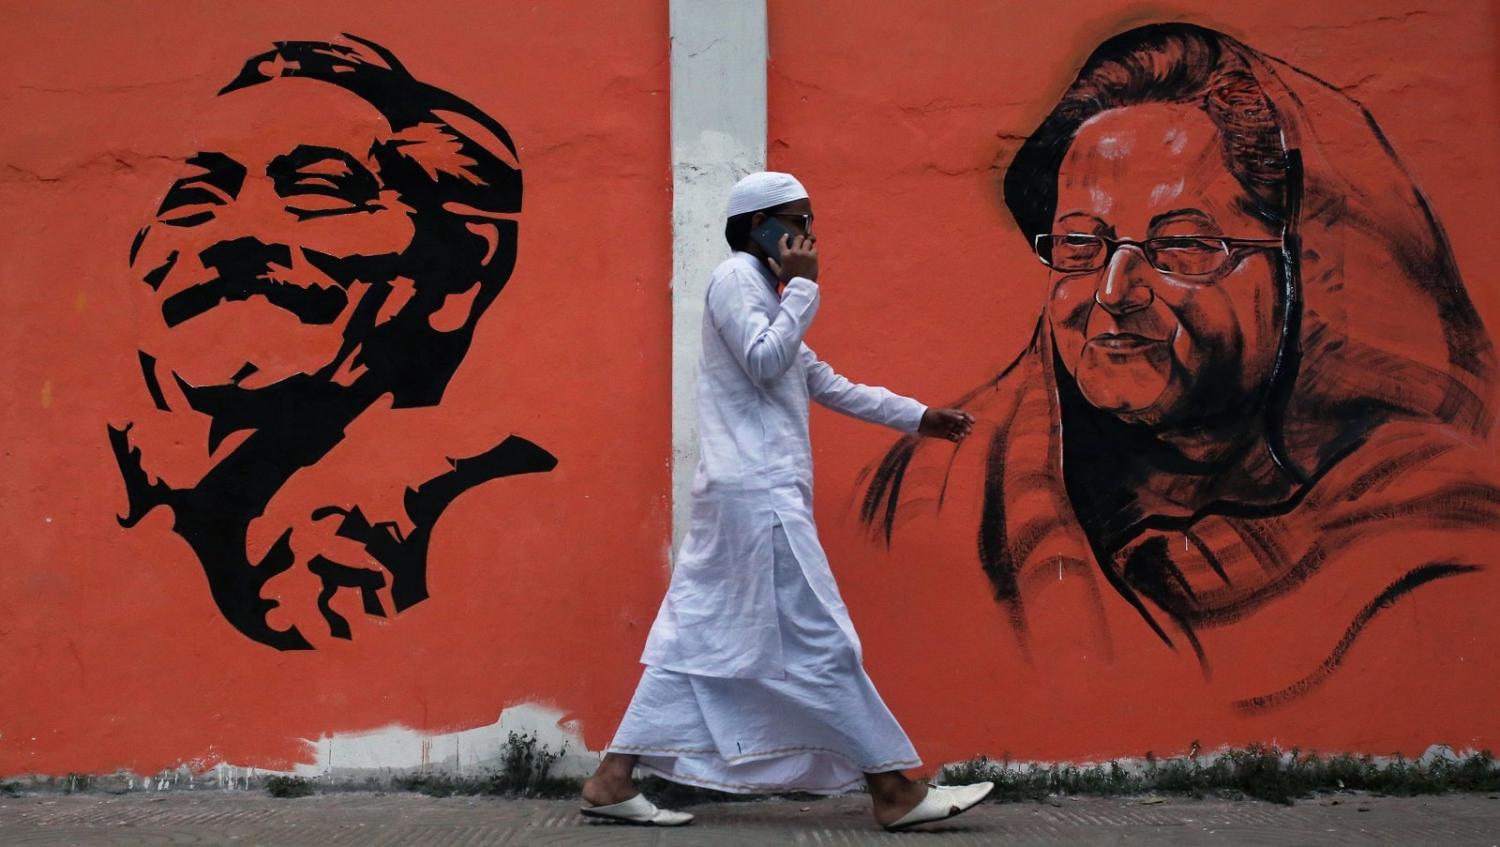 A man walks past a wall with images of Bangladeshi founding father Sheikh Mujibur Rahman (L) and Prime Minister Sheikh Hasina Wazed (R) as 2018 general election campaigns take place in Dhaka (Rehman Asad/AFP via Getty Images)